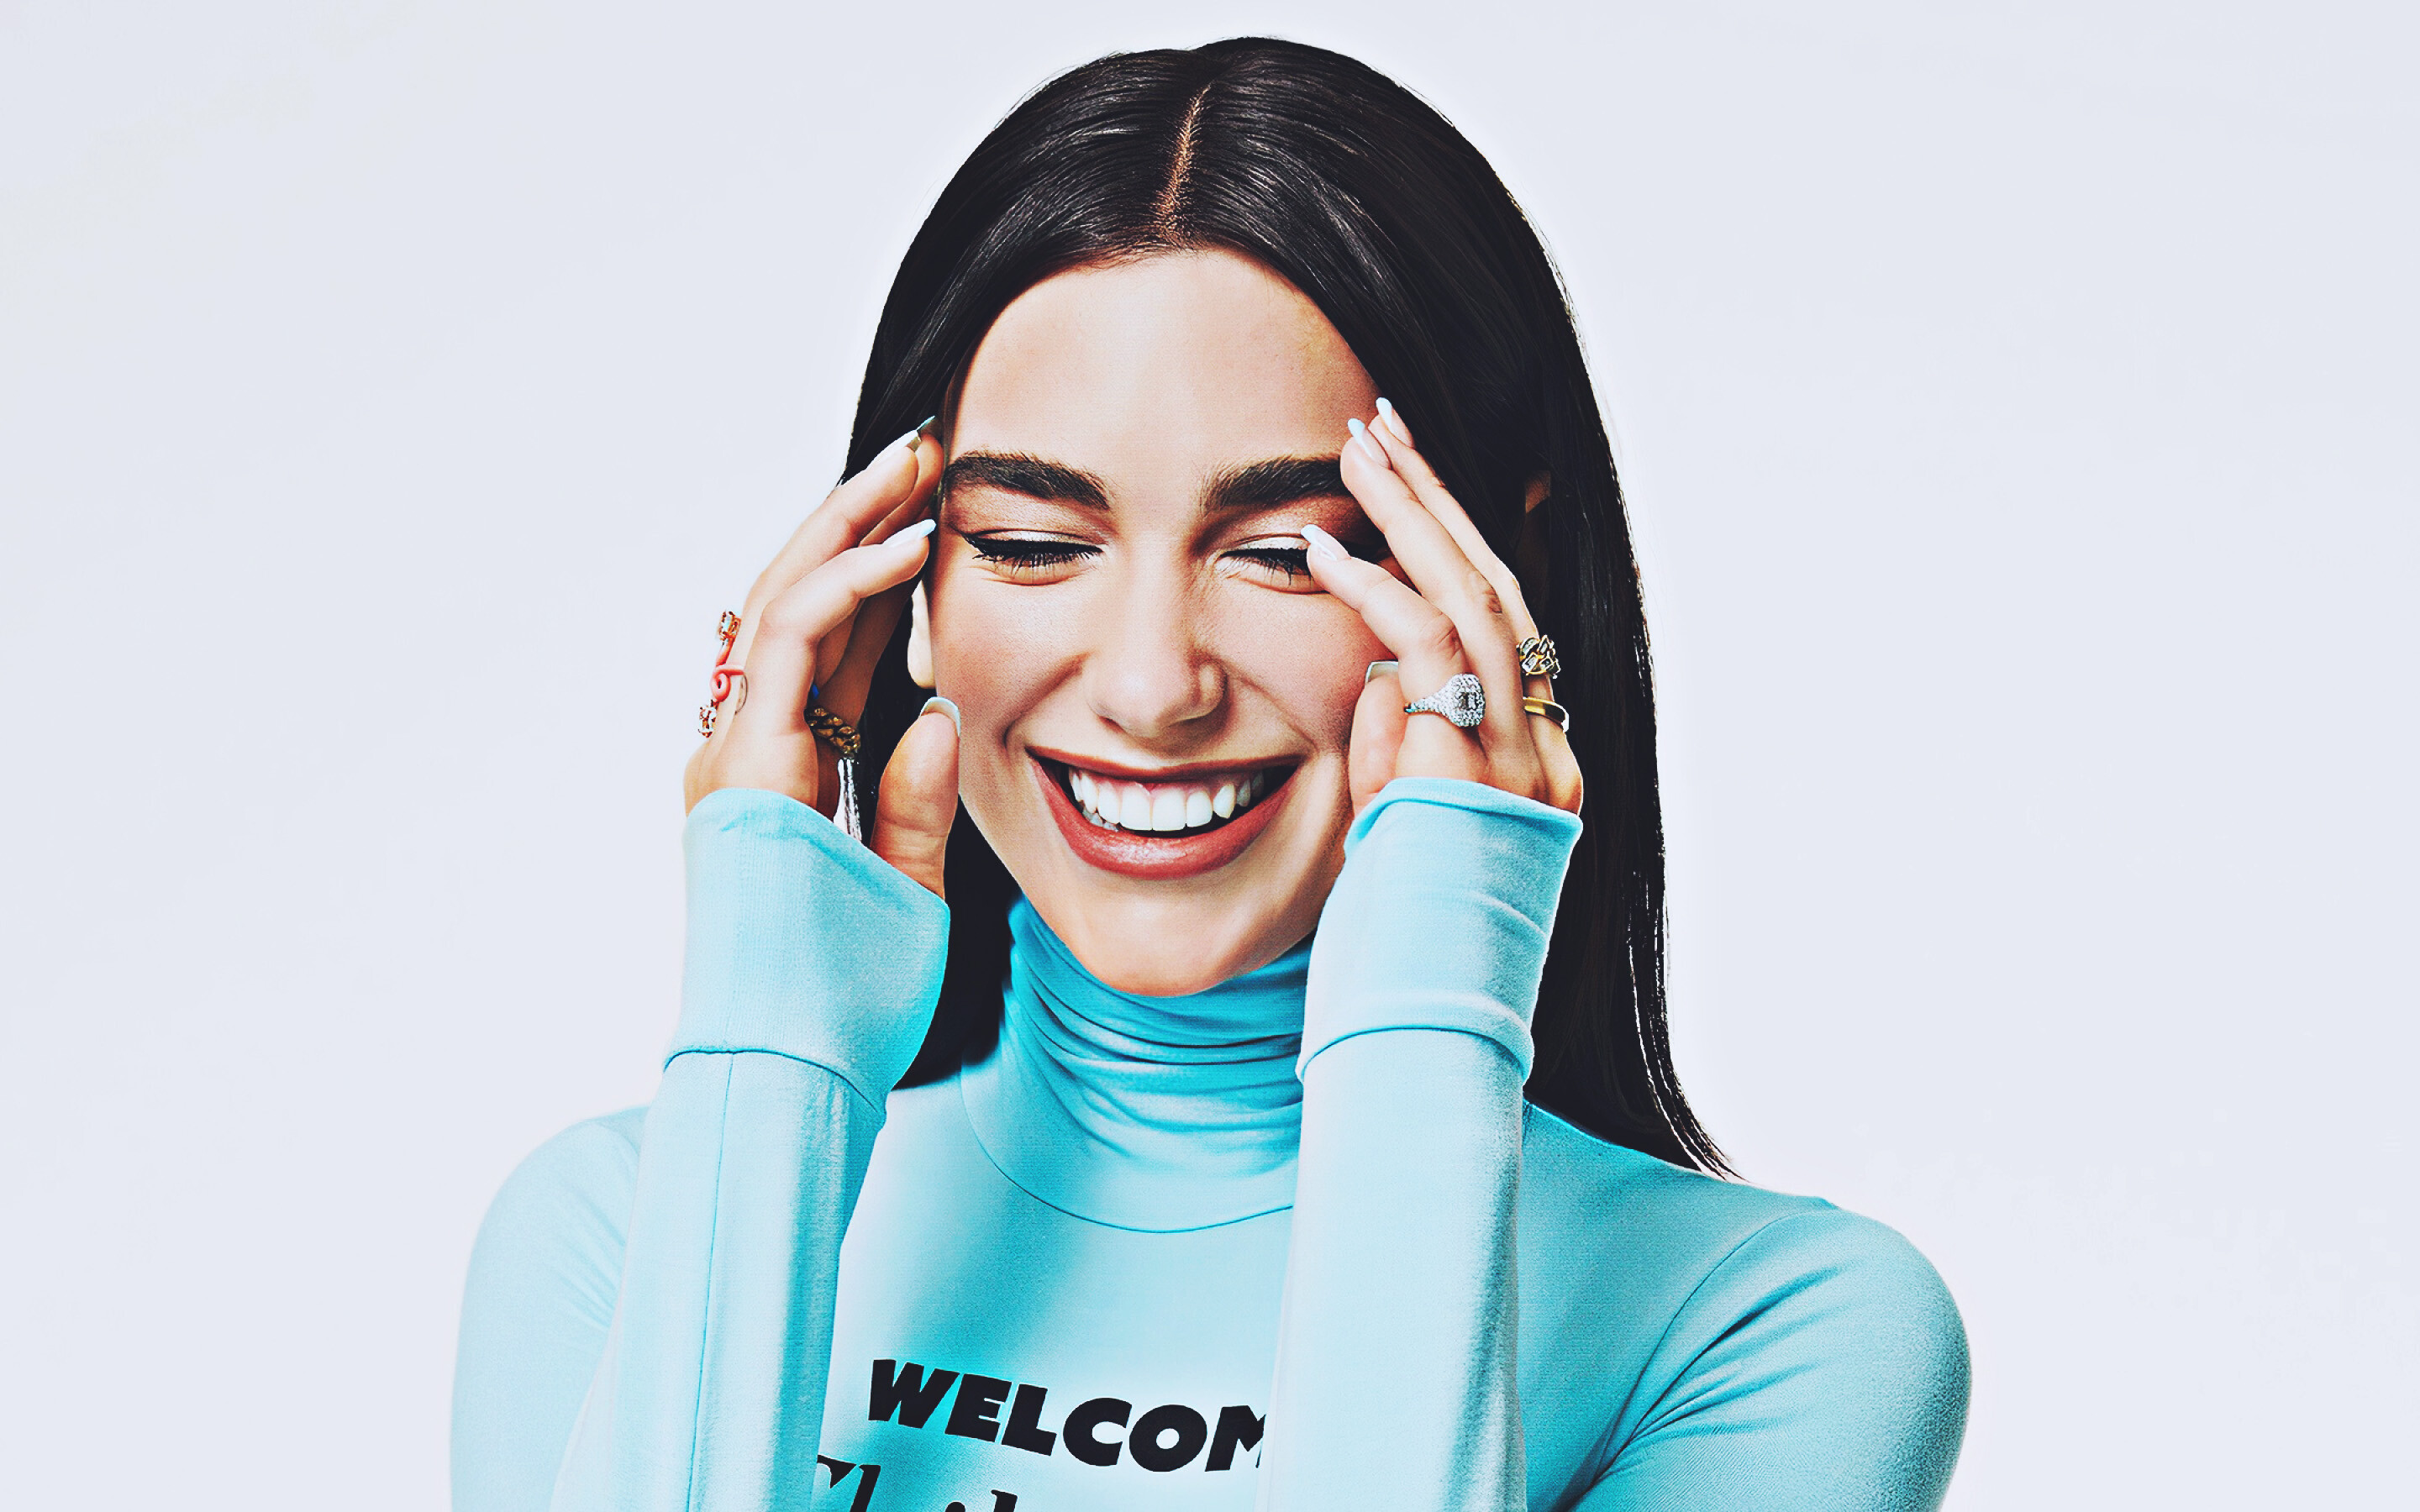 Dua Lipa: British singer, "Physical" was released on 30 January 2020. 2880x1800 HD Background.